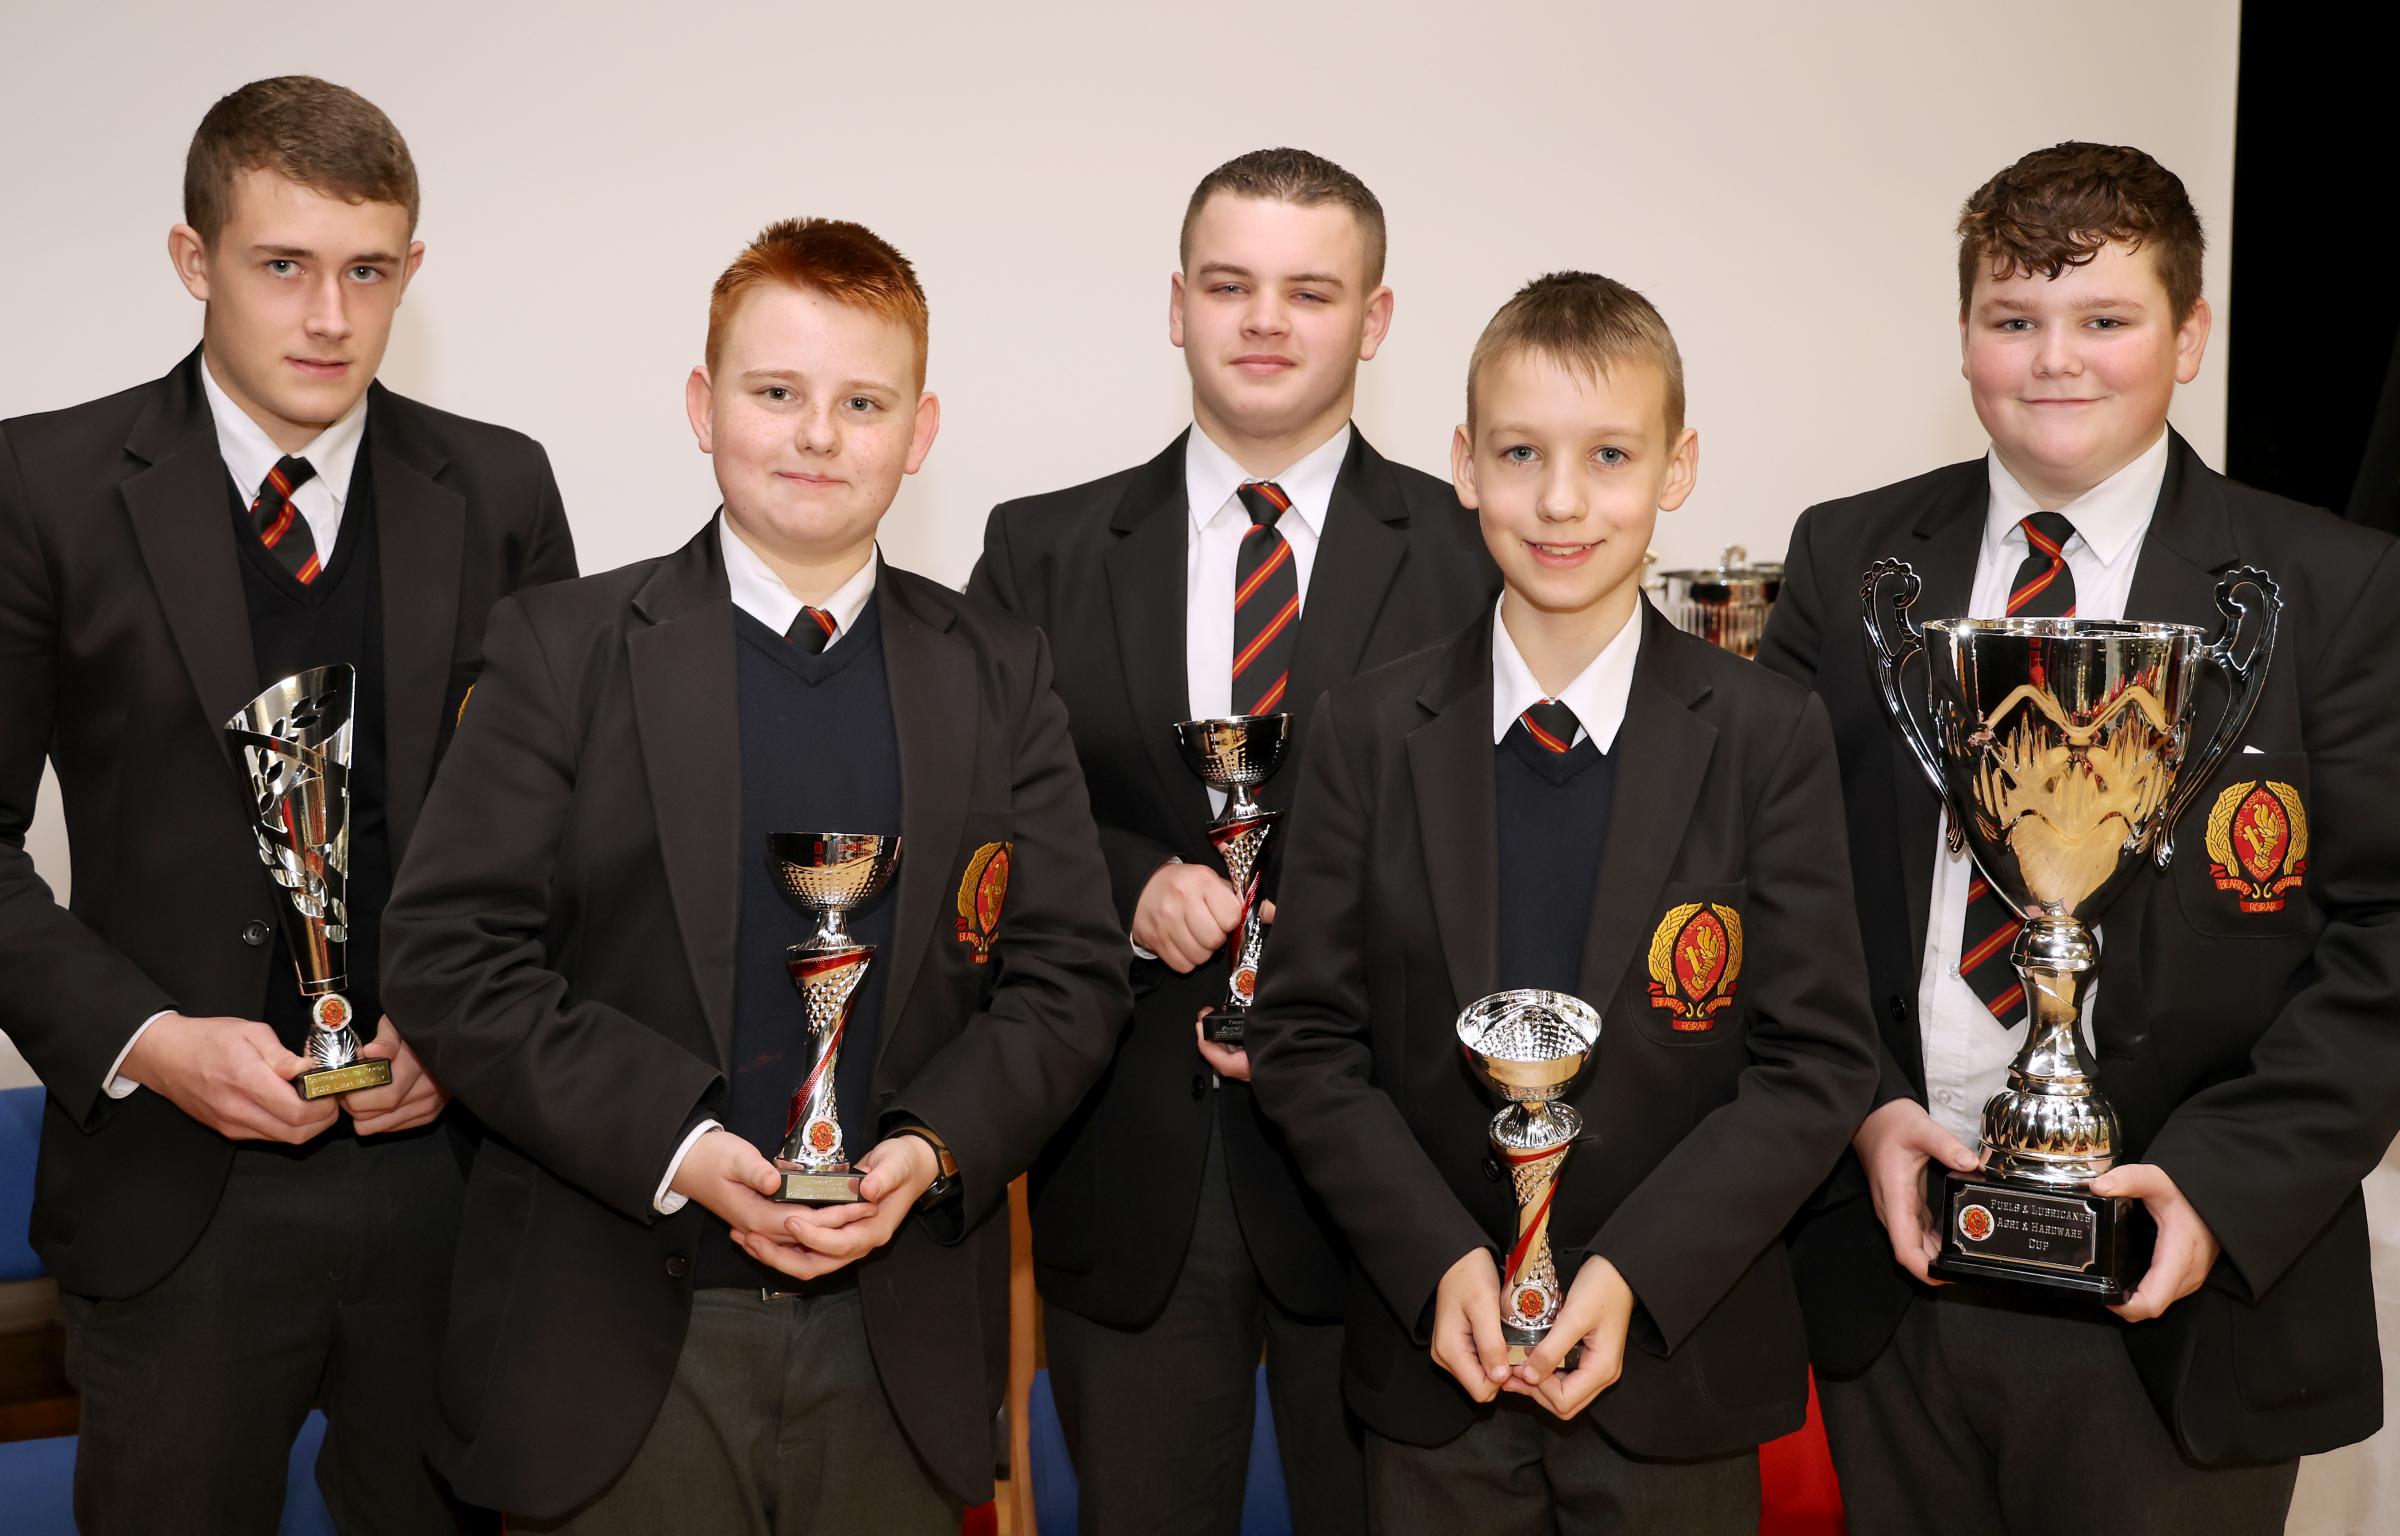 Special Award Winners at St.Josephs College, from left, Lukas McNally, Elamantas Andruskevicius, Christopher Maguire, Danielis Andruskevicius and Sean Sheerin.